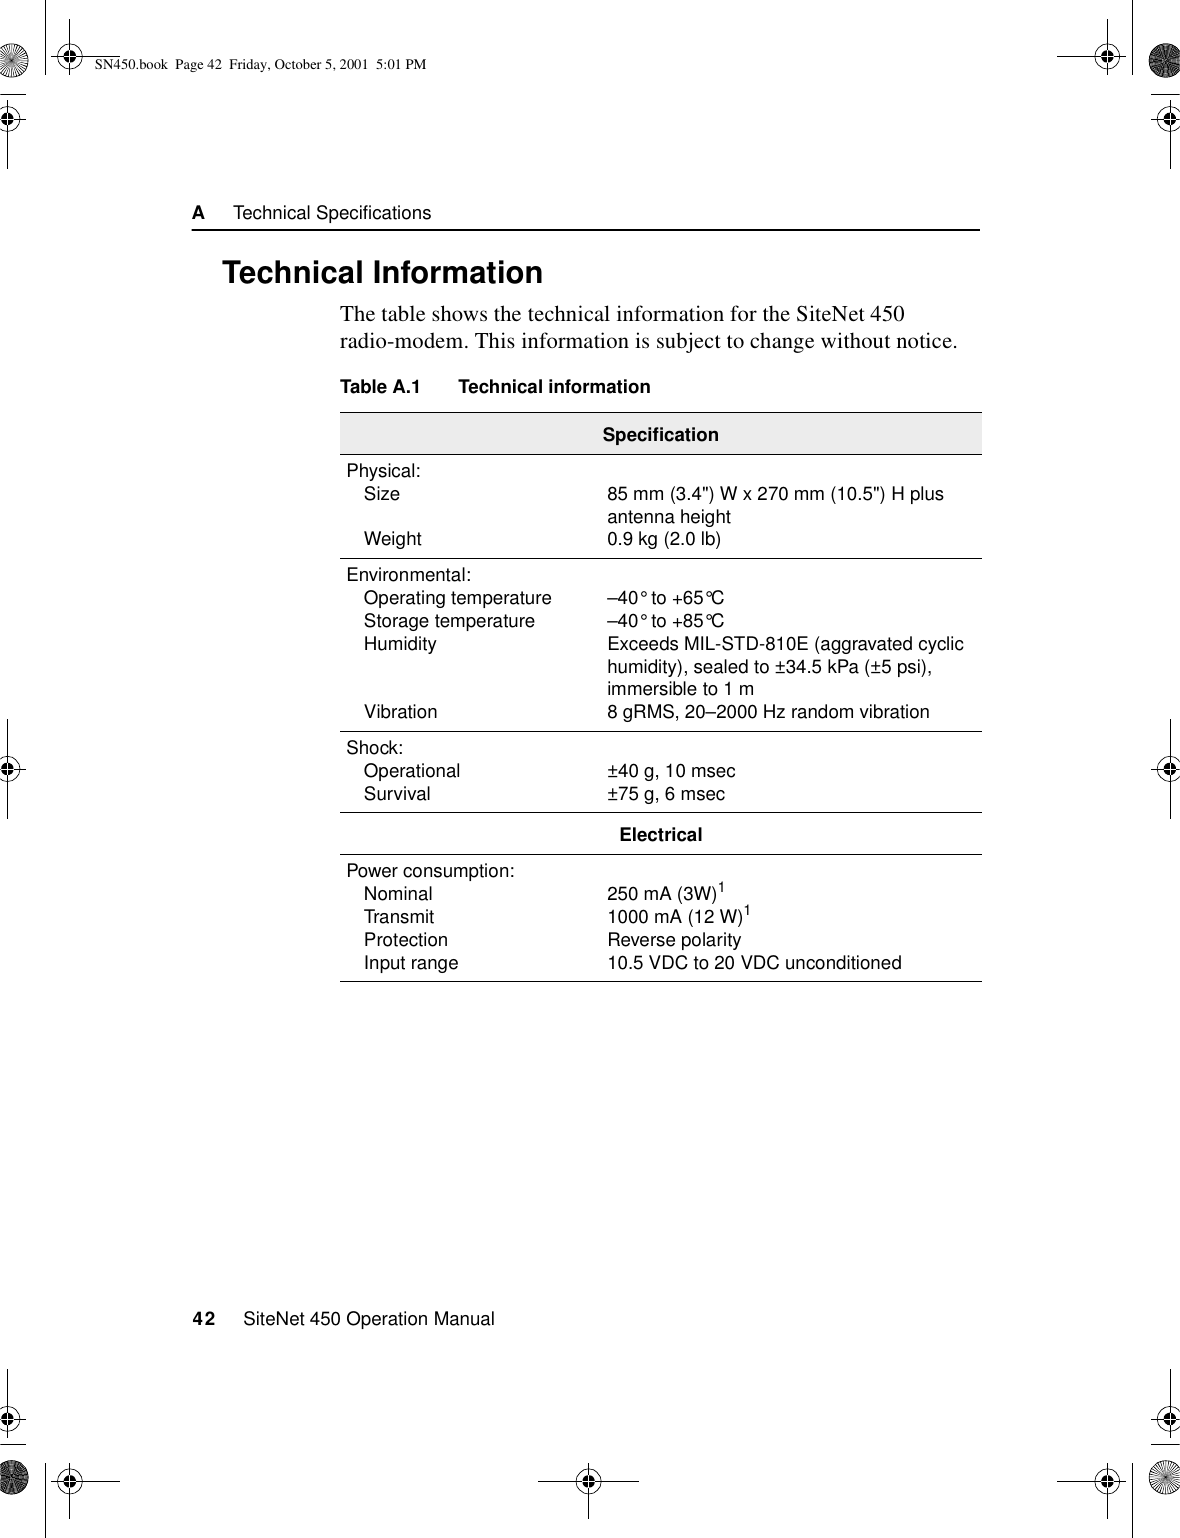 A     Technical Specifications42     SiteNet 450 Operation ManualA.1 Technical InformationThe table shows the technical information for the SiteNet 450 radio-modem. This information is subject to change without notice.Table A.1 Technical informationSpecificationPhysical:SizeWeight85 mm (3.4&quot;) W x 270 mm (10.5&quot;) H plus antenna height0.9 kg (2.0 lb)Environmental:Operating temperatureStorage temperatureHumidityVibration–40° to +65°C–40° to +85°CExceeds MIL-STD-810E (aggravated cyclic humidity), sealed to ±34.5 kPa (±5 psi), immersible to 1 m8gRMS, 20–2000 Hz random vibrationShock:OperationalSurvival ±40 g, 10 msec±75 g, 6 msecElectricalPower consumption:NominalTransmitProtectionInput range250 mA (3W)11000 mA (12 W)1Reverse polarity10.5 VDC to 20 VDC unconditionedSN450.book  Page 42  Friday, October 5, 2001  5:01 PM